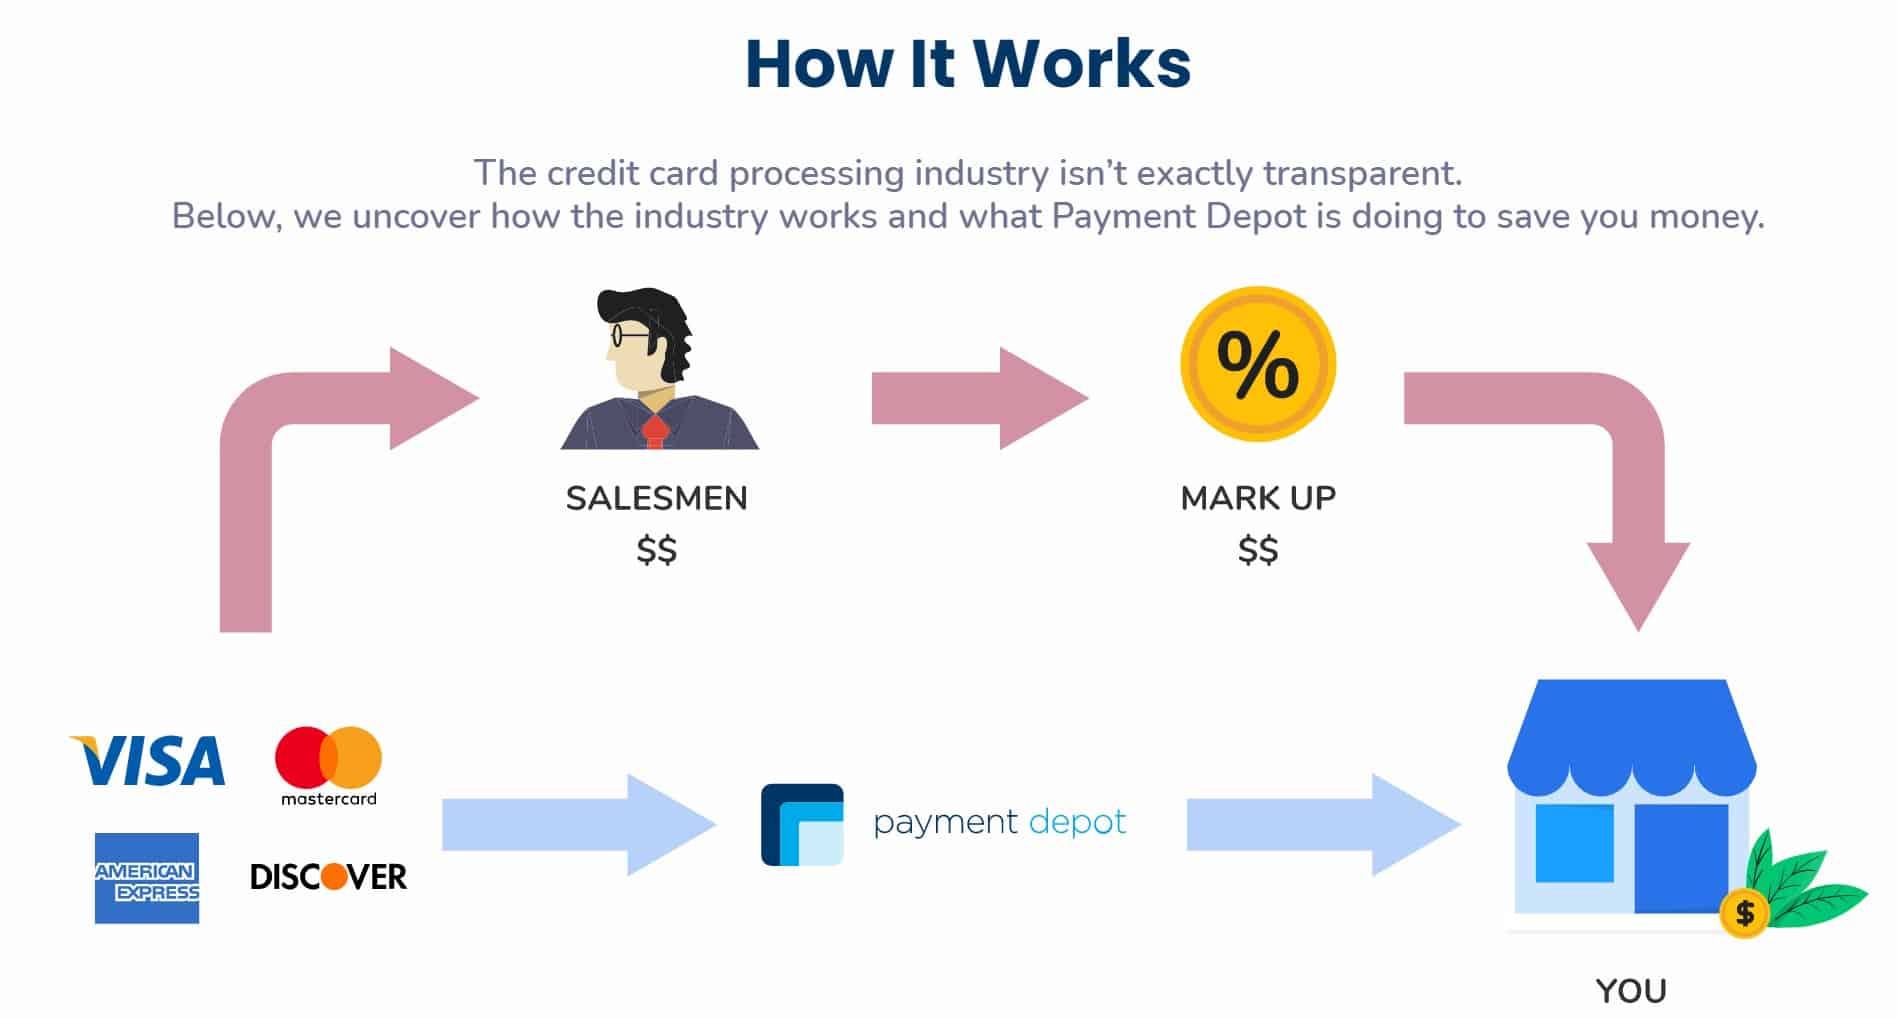 Payment Depot - How It Works